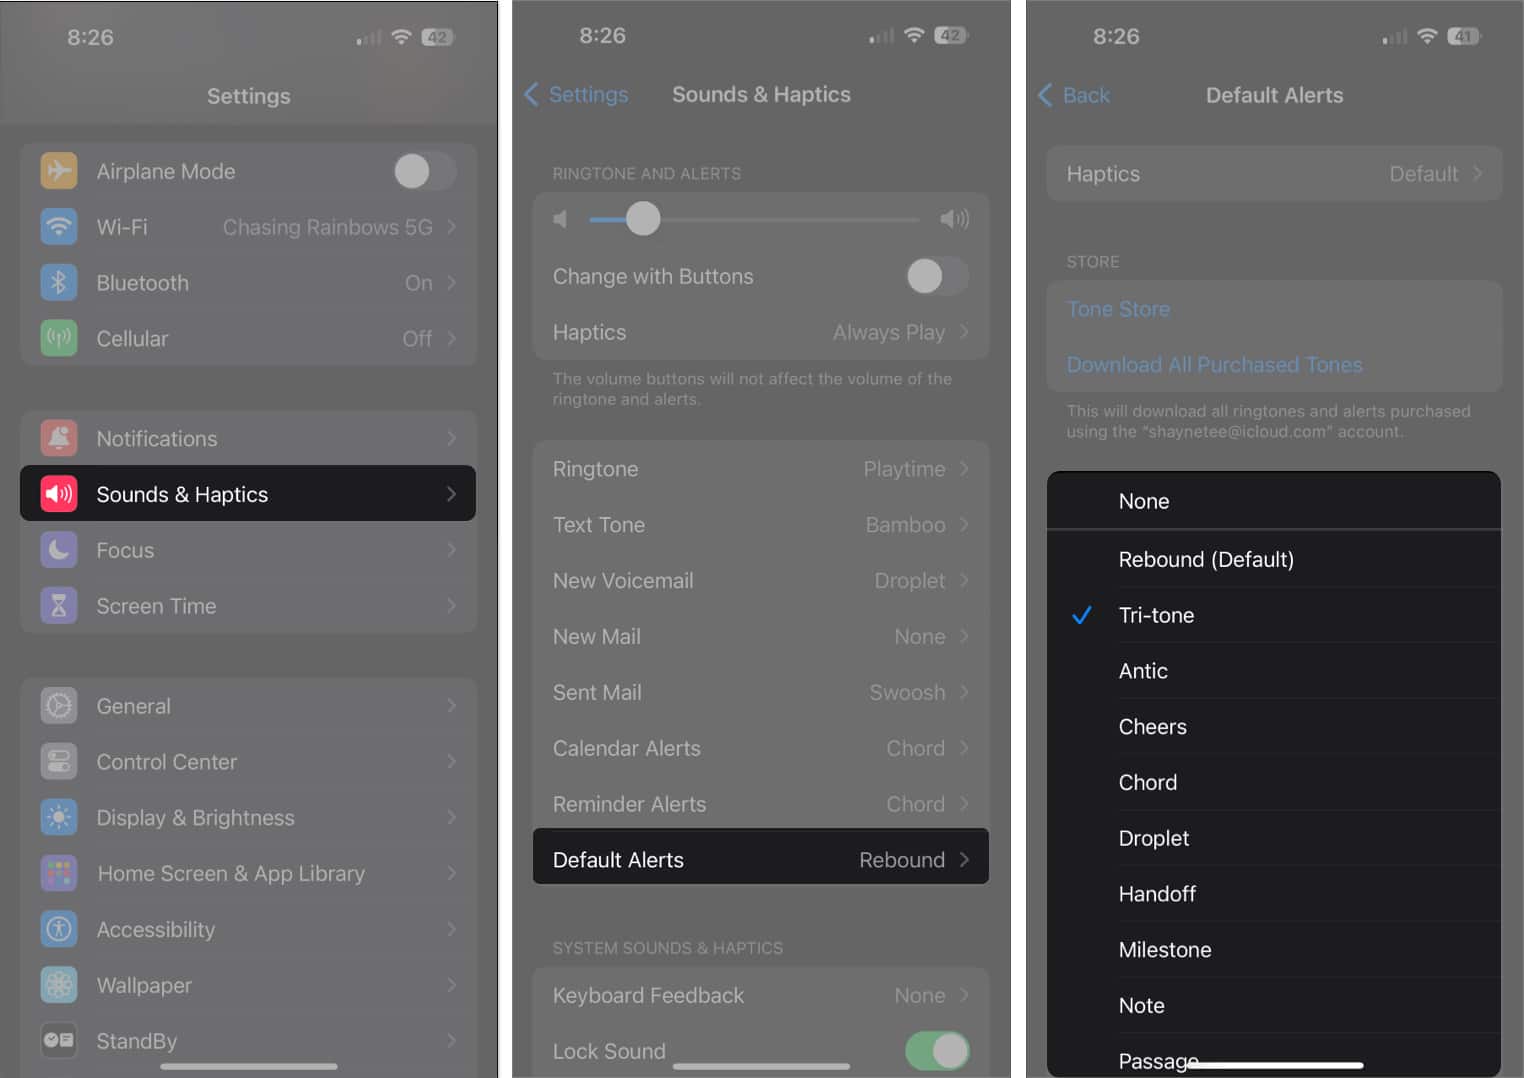 Head to Sound & Haptics, Default Alerts and select new tone